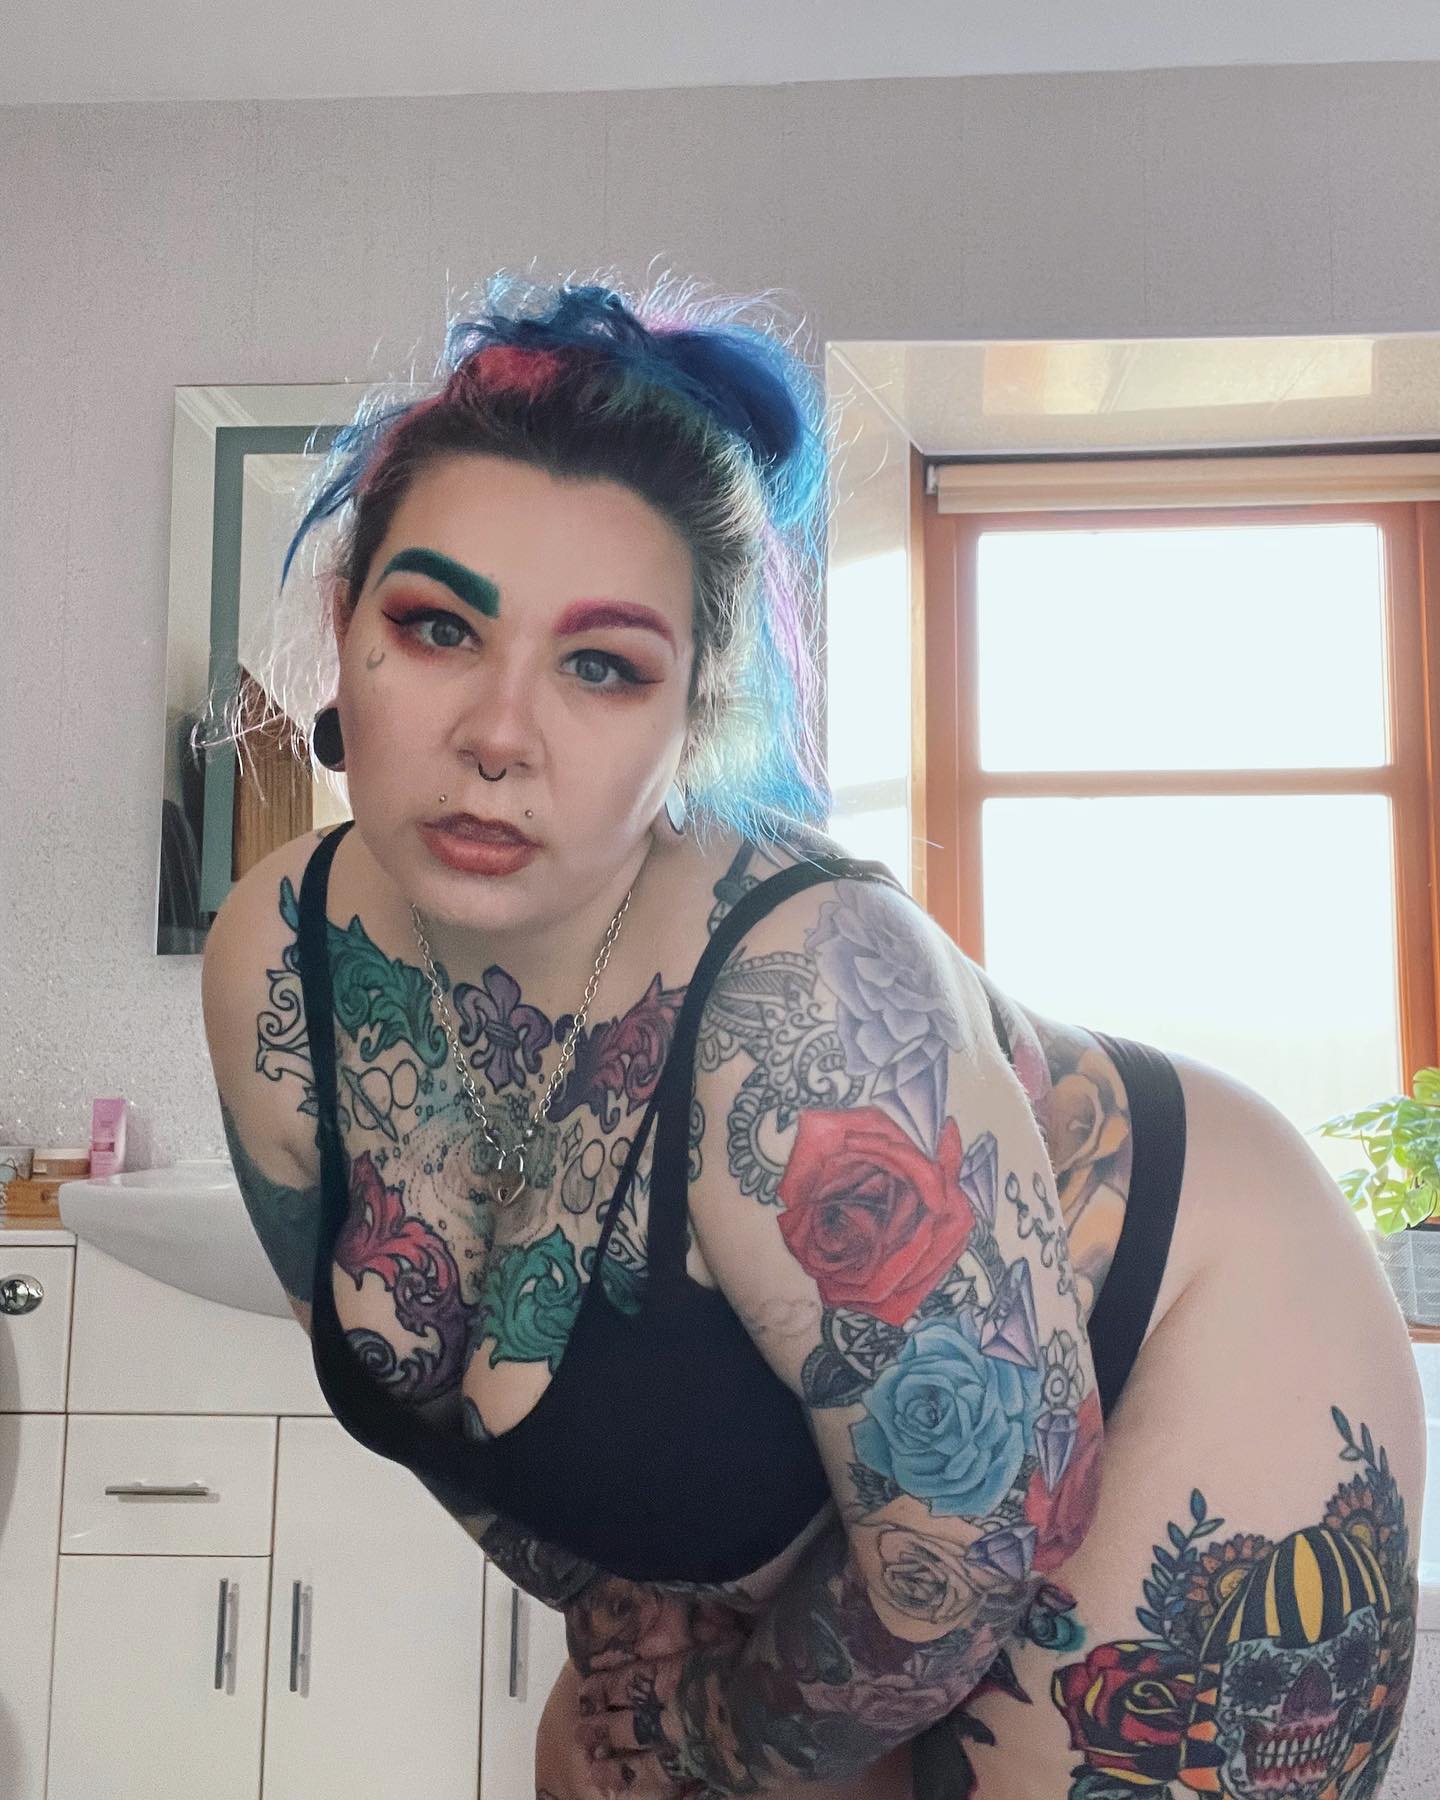 Did someone ask for a bad b1tch? 😘
.

#of #ofcreator #onlyfanslink #onlyfansgirl #onlyfans #onlyfanspromo @onlyfans #promotion #promobabe #girlswithtattoos #facetattoo #girlswithpiercings #altgirls #bbw  #emo